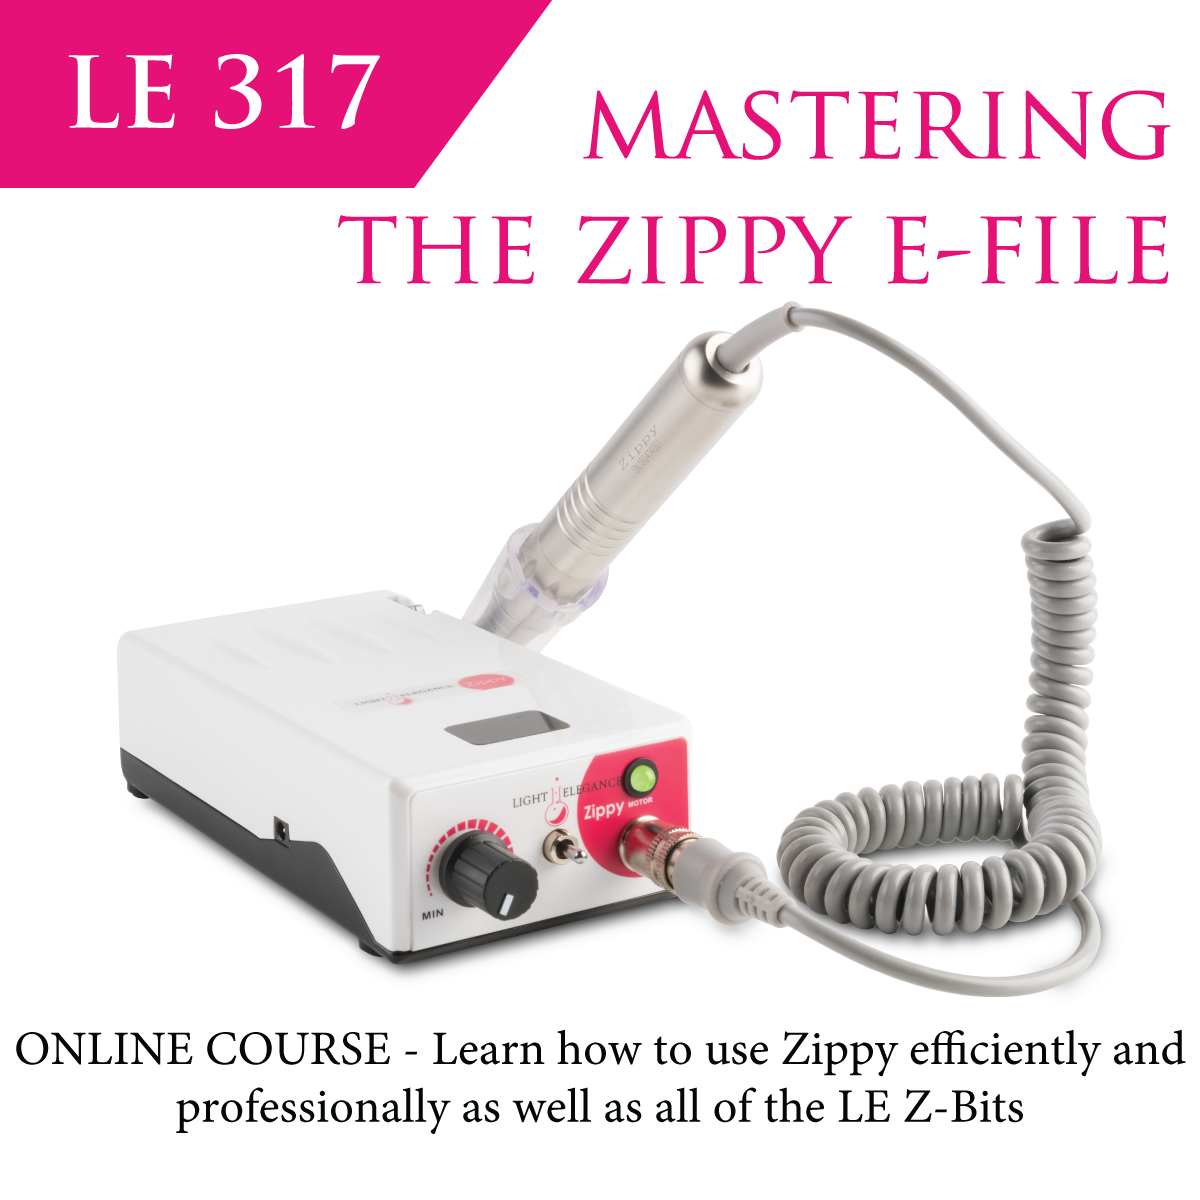 NEW! ONLINE COURSE - LE 317 | Mastering the Zippy eFile